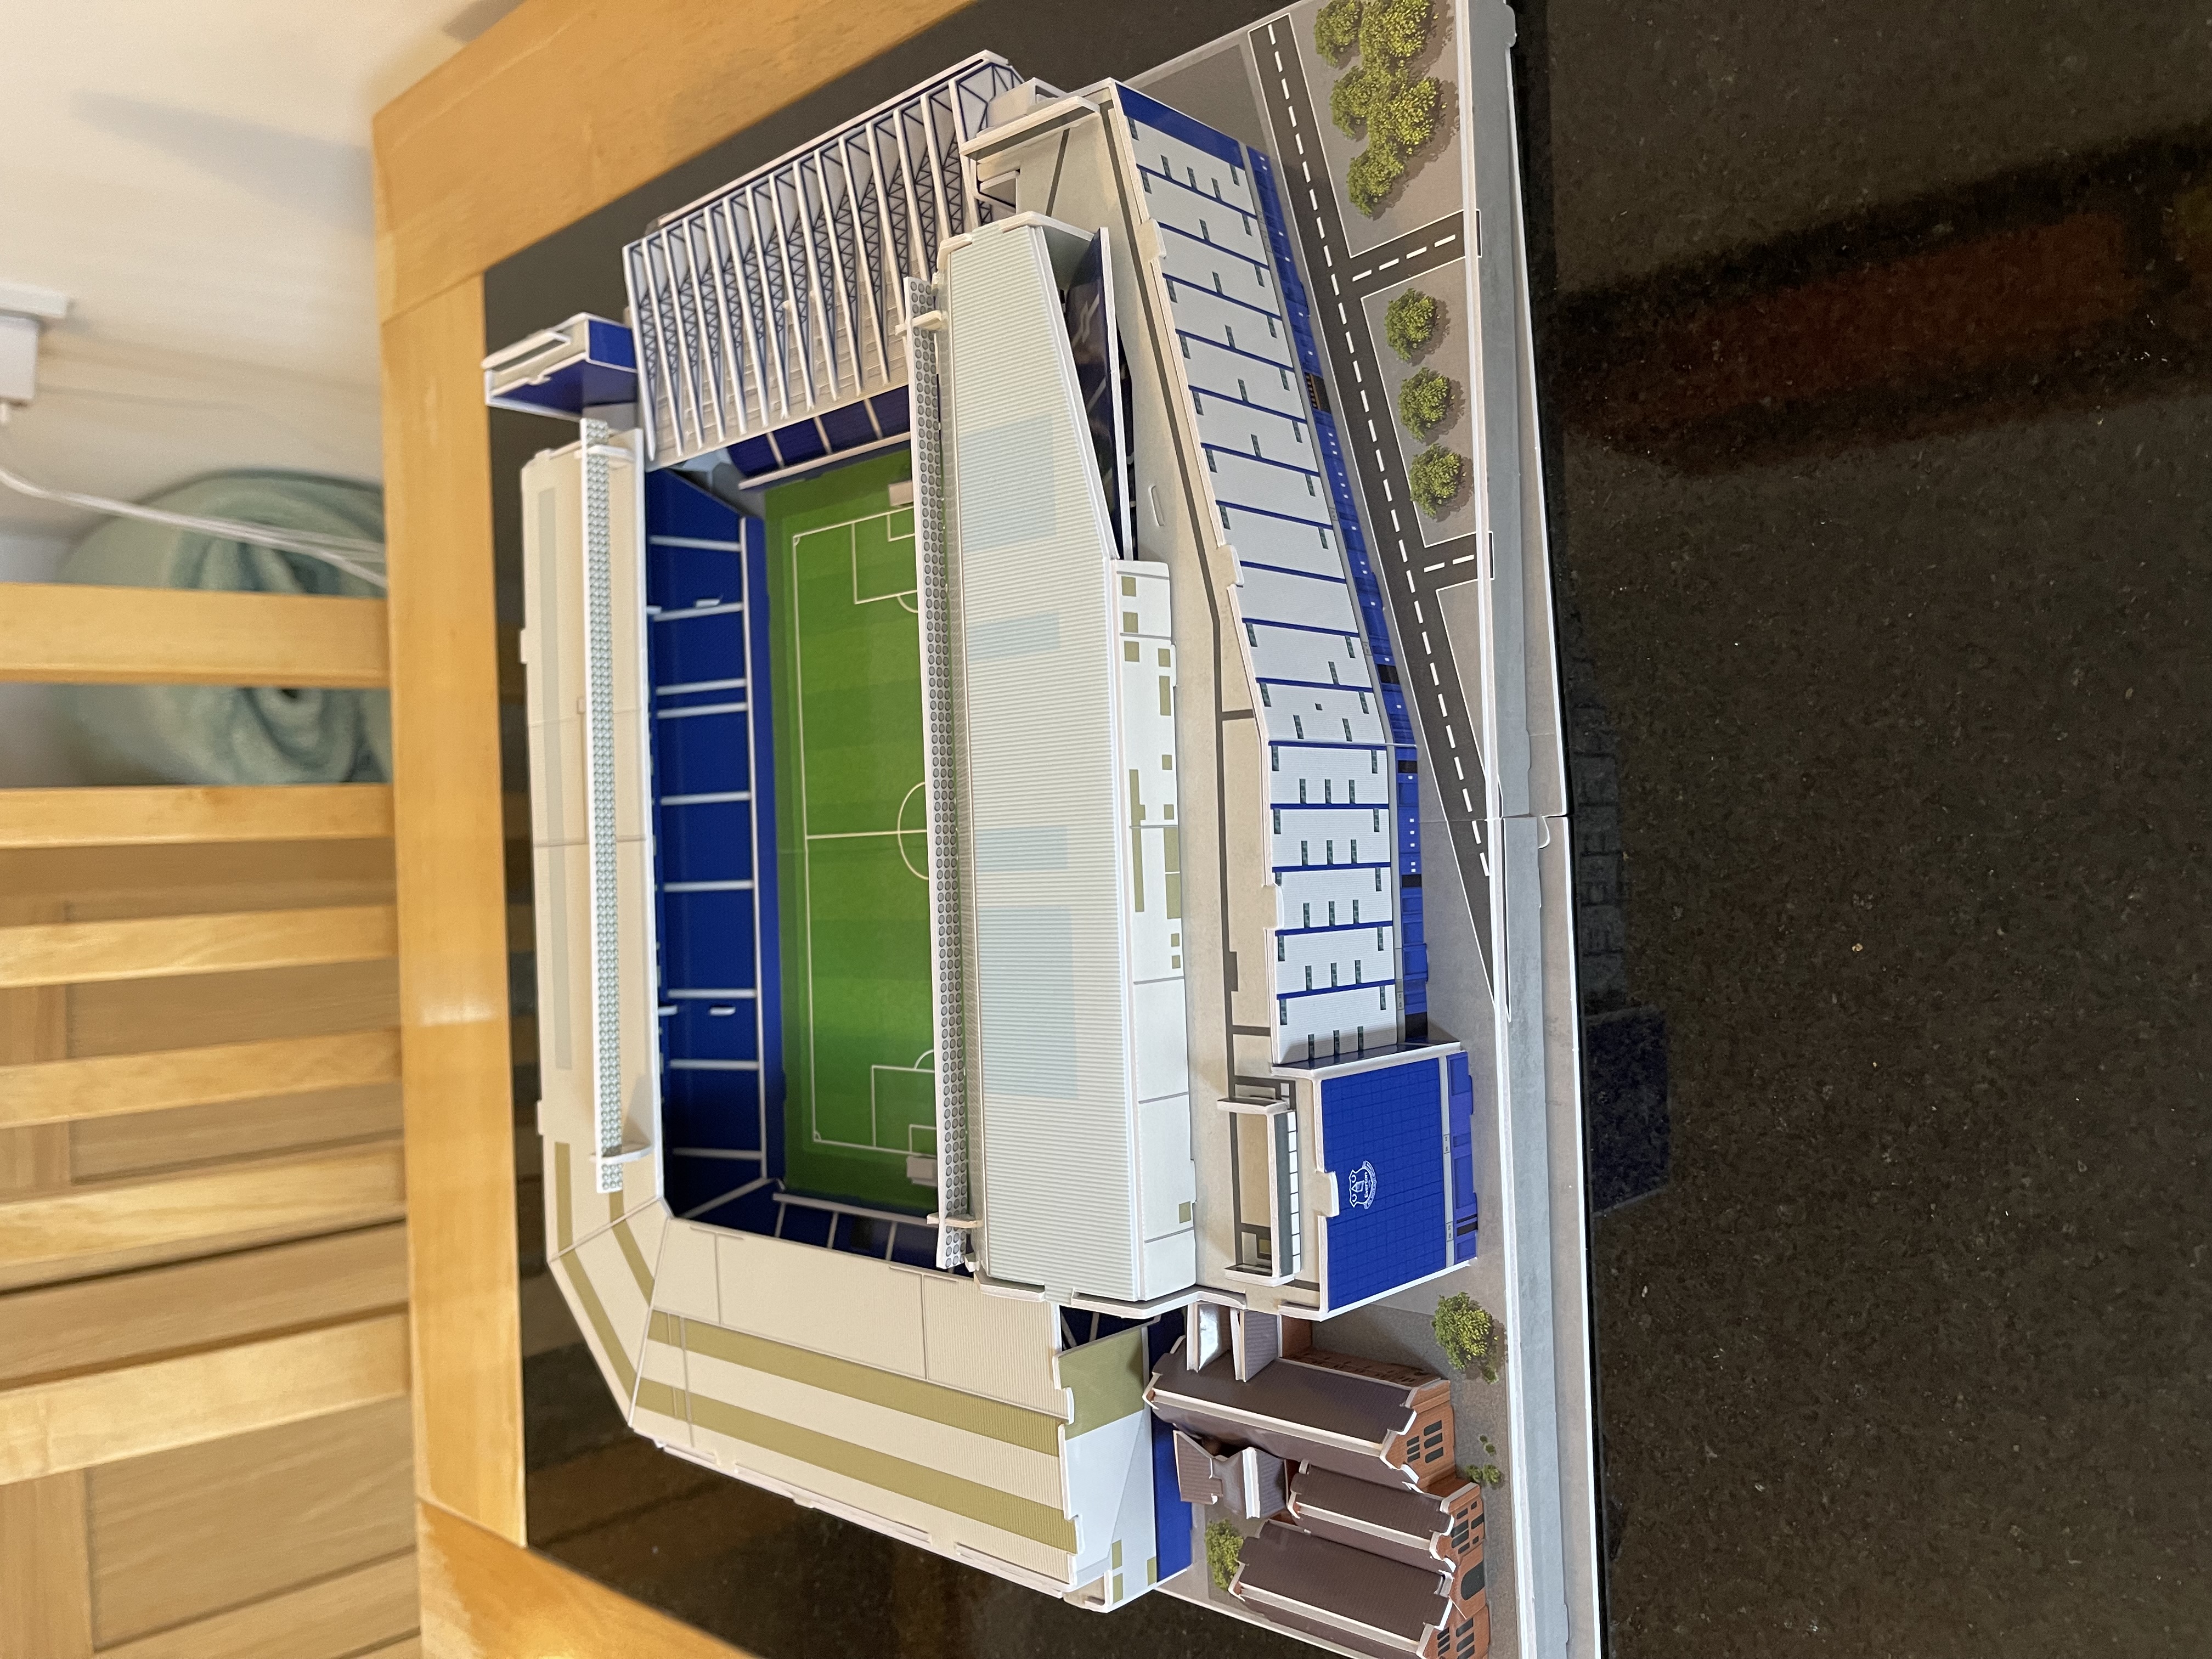 Never been lucky to go to Goodison so I built it  from a kit